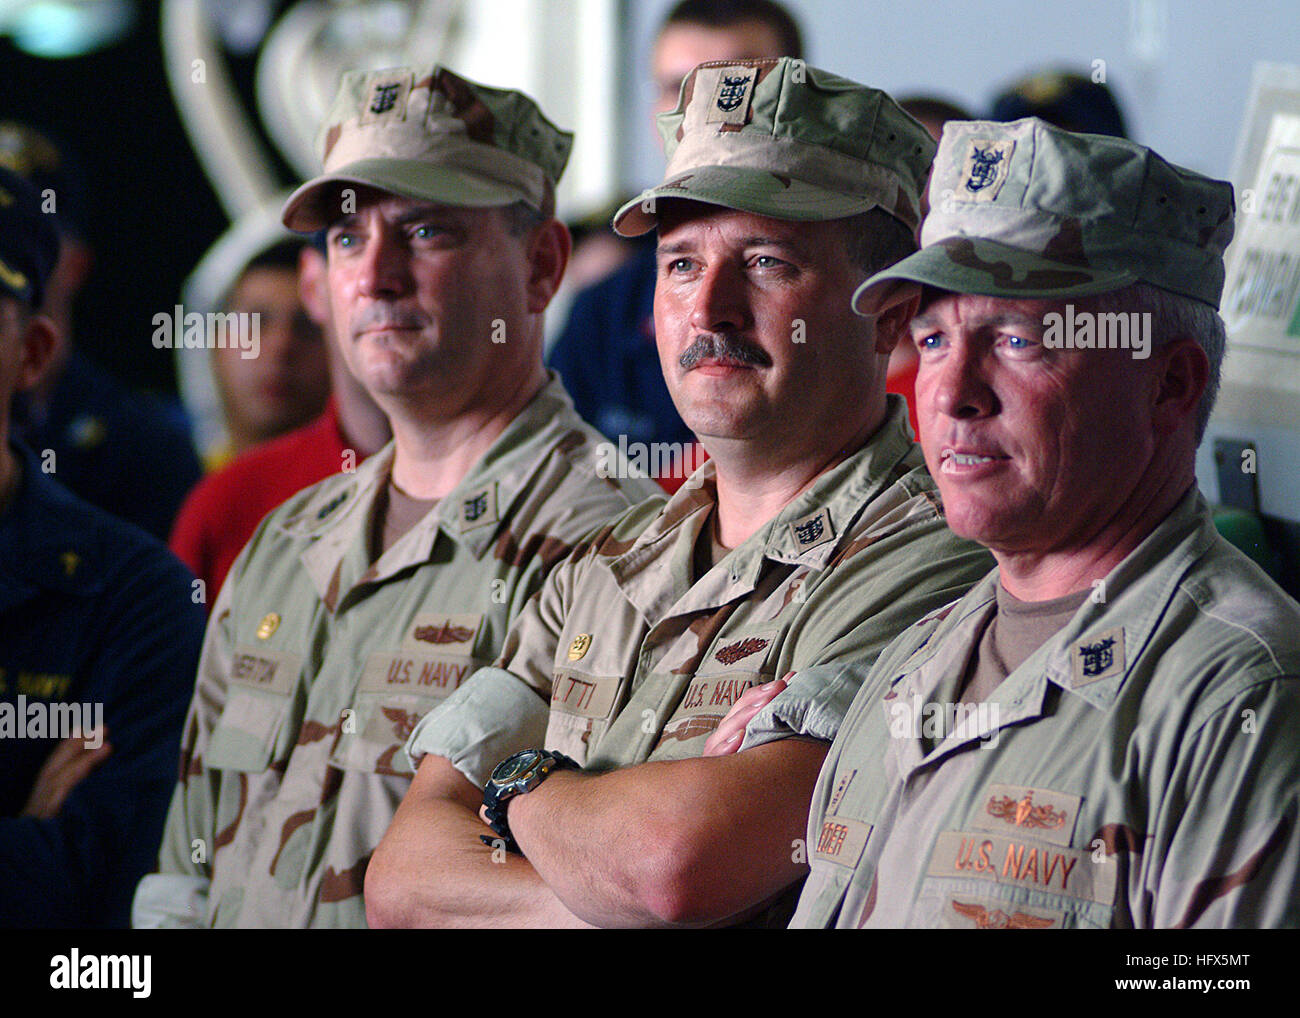 050712-N-0962S-136  Persian Gulf (July 12, 2005) - Three of the Navy's top Command Master Chiefs (CMCs) observe an all hands call by Master Chief Petty Officer of the Navy (MCPON) Terry Scott. From left, 3rd Fleet CMC Terry Etherton; 2nd Fleet CMC Don Kultti and 5th Fleet CMC Kelly Schneider, traveled throughout the Persian Gulf focusing on Sailors issues in regards to training, equipment, and manning. U.S. Navy photo by Journalist 1st Class Brandan W. Schulze (RELEASED) US Navy 050712-N-0962S-136 Three of the Navy's top Command Master Chiefs (CMCs) observe an all hands call by Master Chief Pe Stock Photo